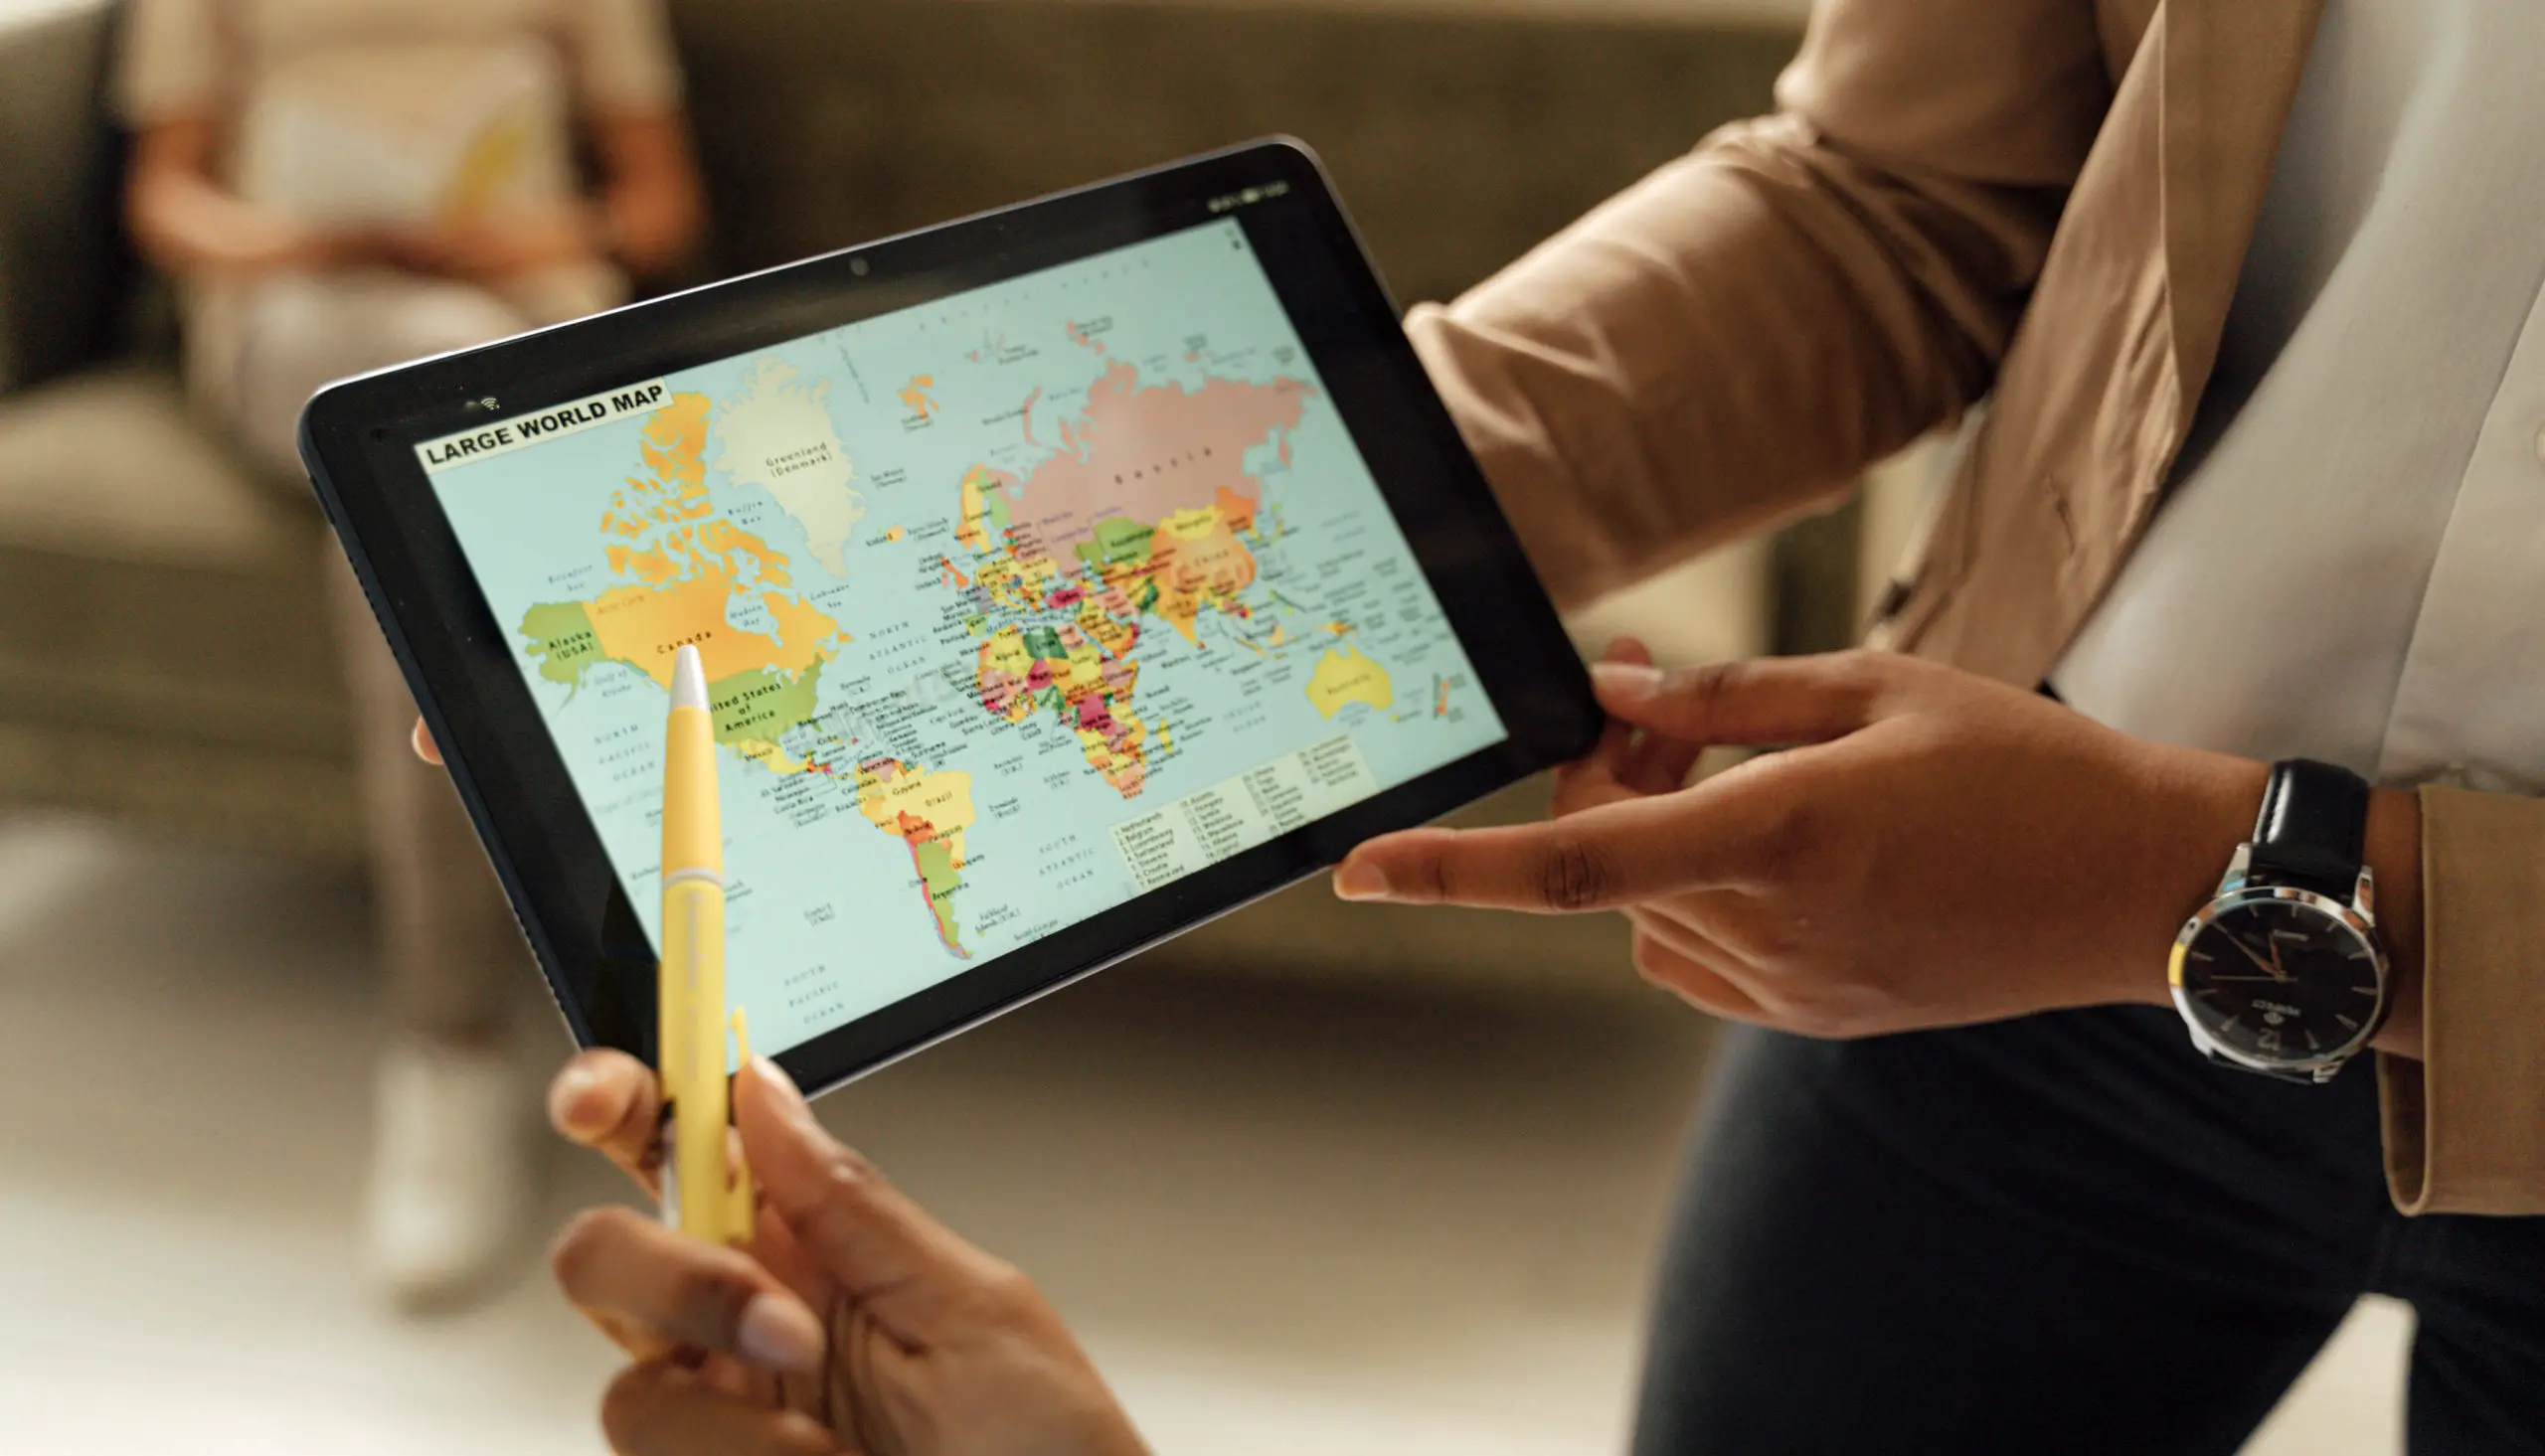 Close up photo of a person holding a tablet computer showing the world map